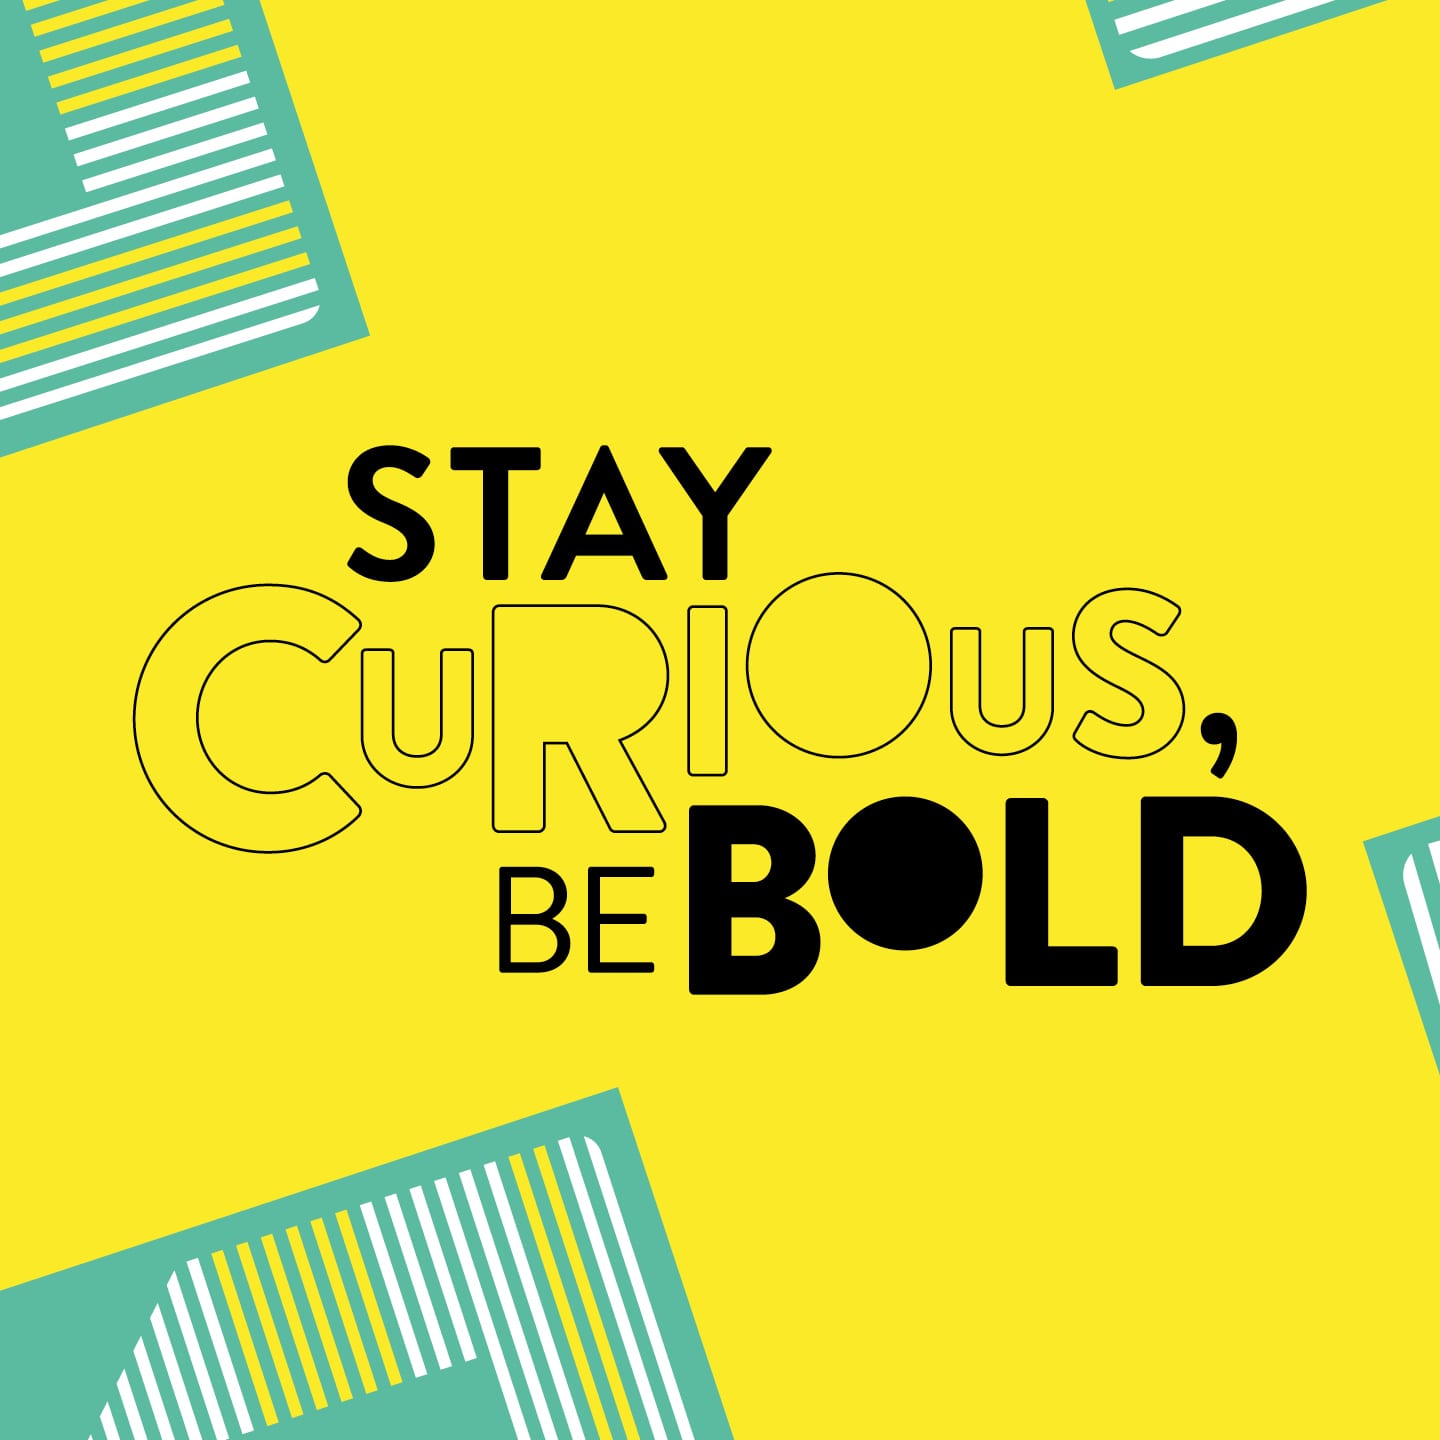 Stay Curious be Bold creative